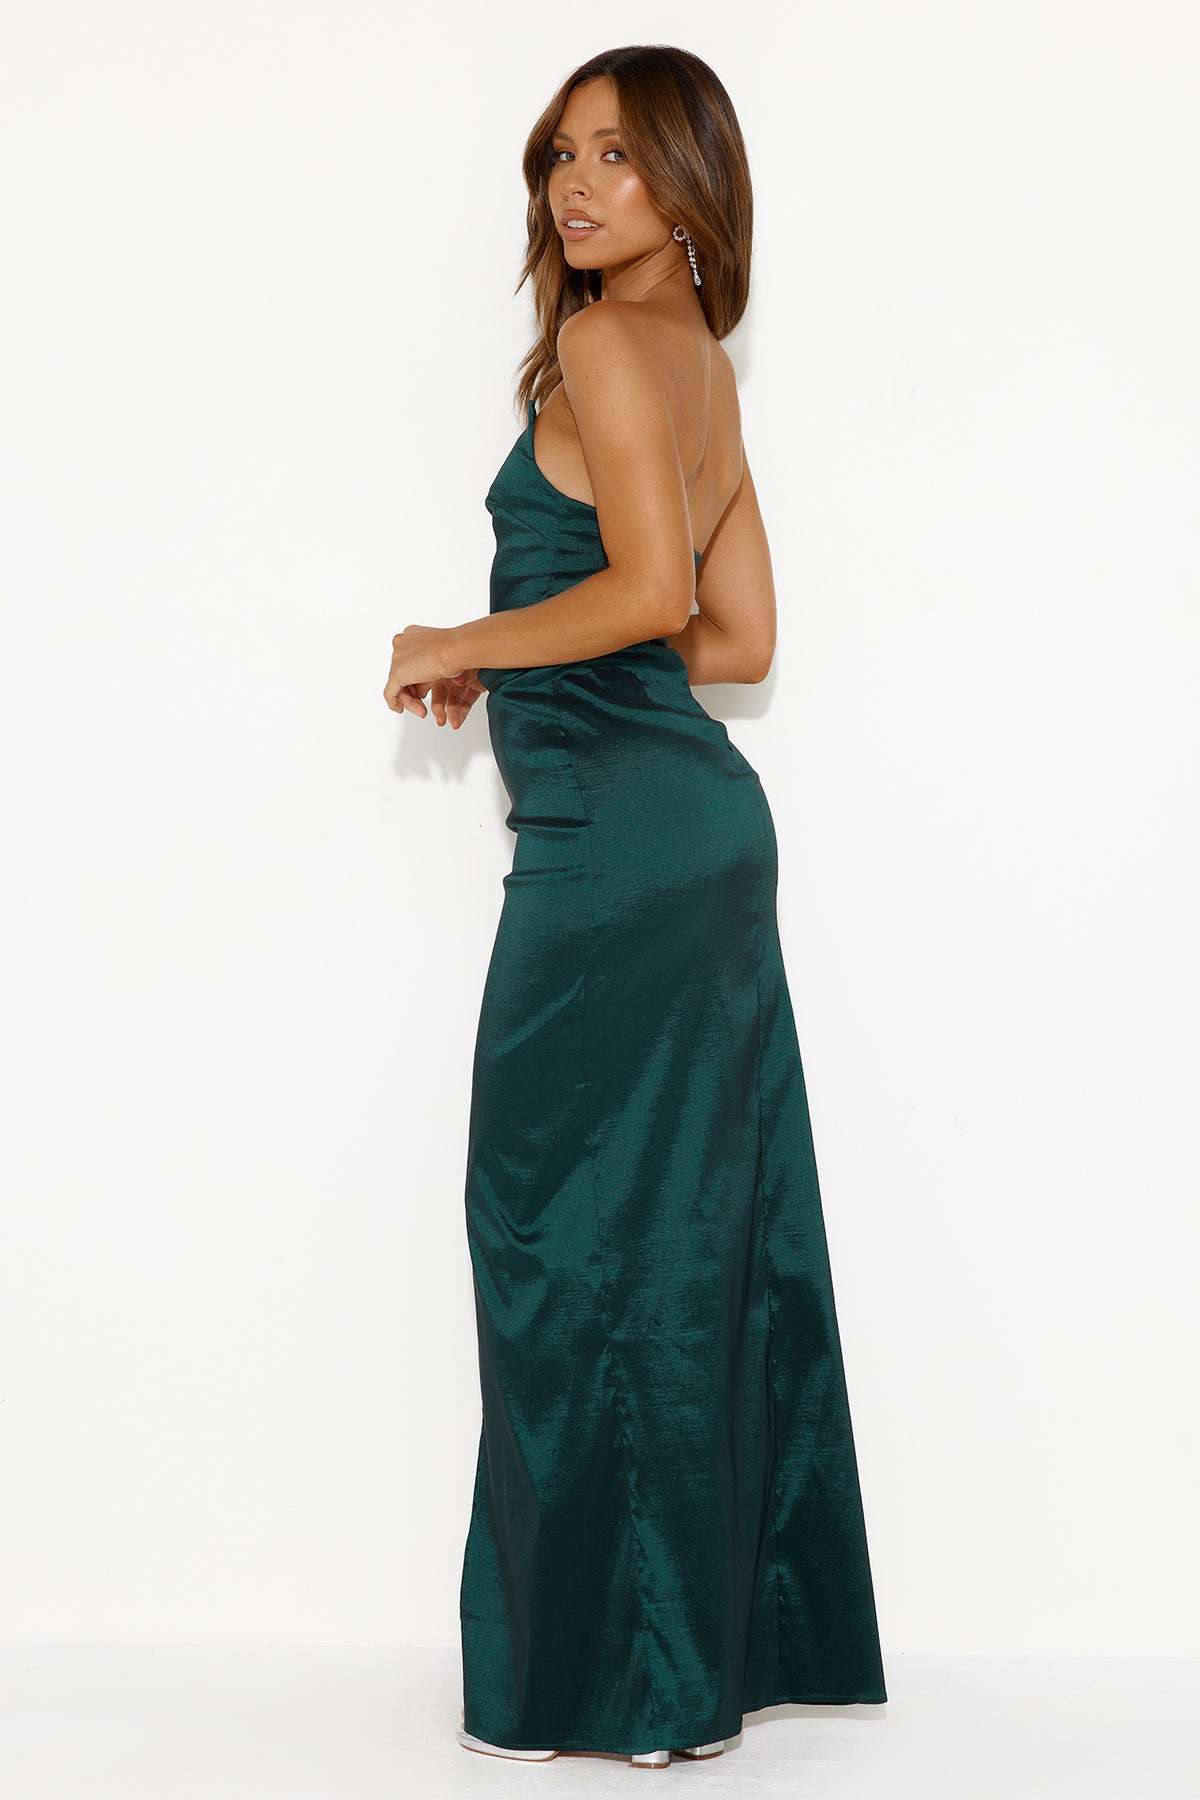 Shop Formal Dress - DEAR EMILIA Style Finesse Strapless Satin Maxi Dress Forest Green third image